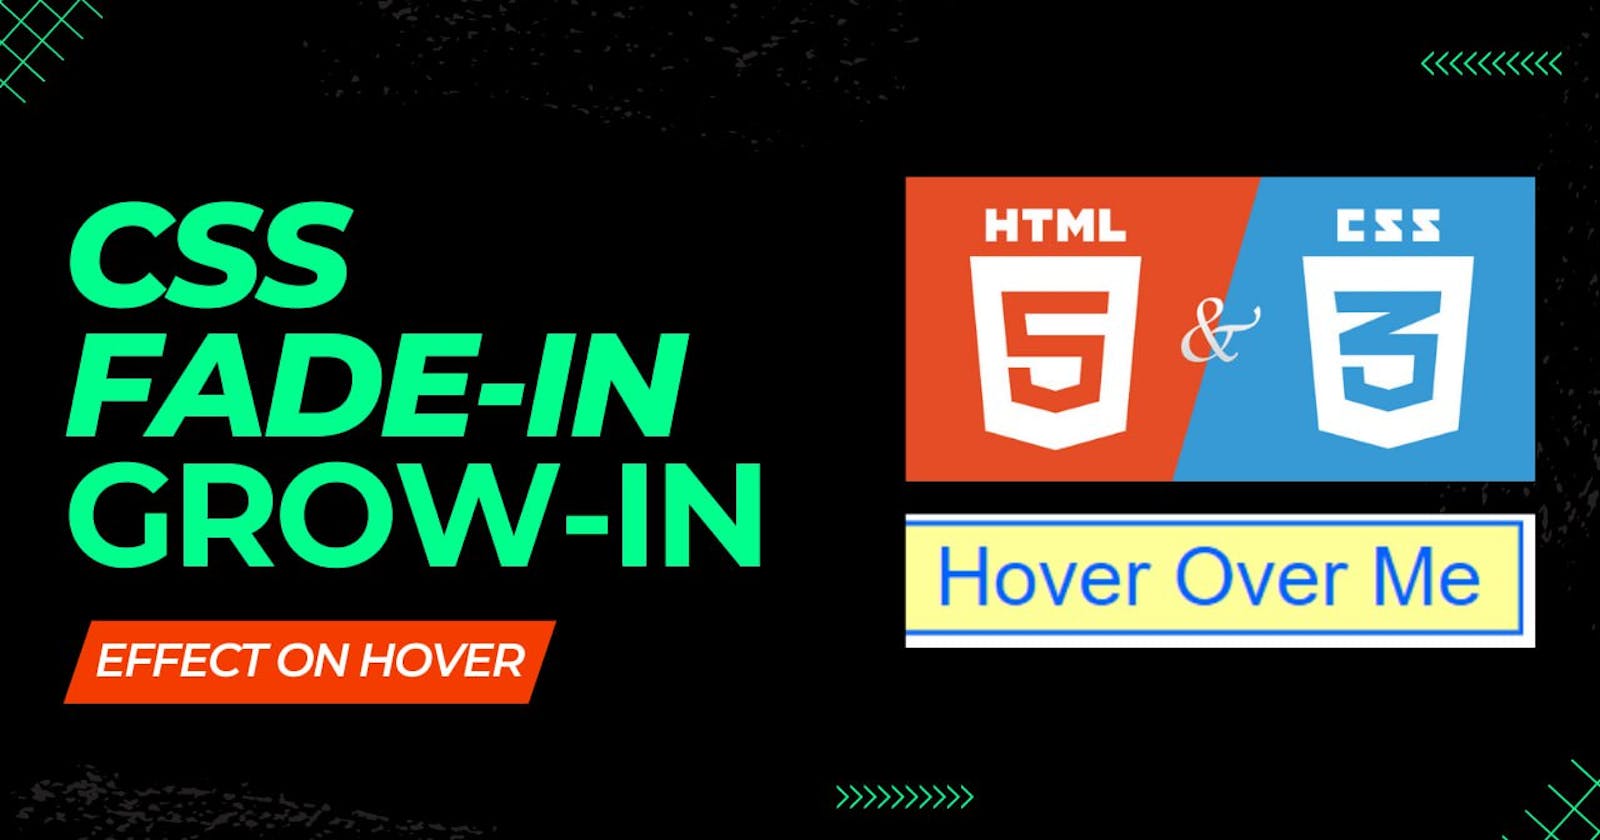 CSS Fade-in & Grow-in Effect on Hover